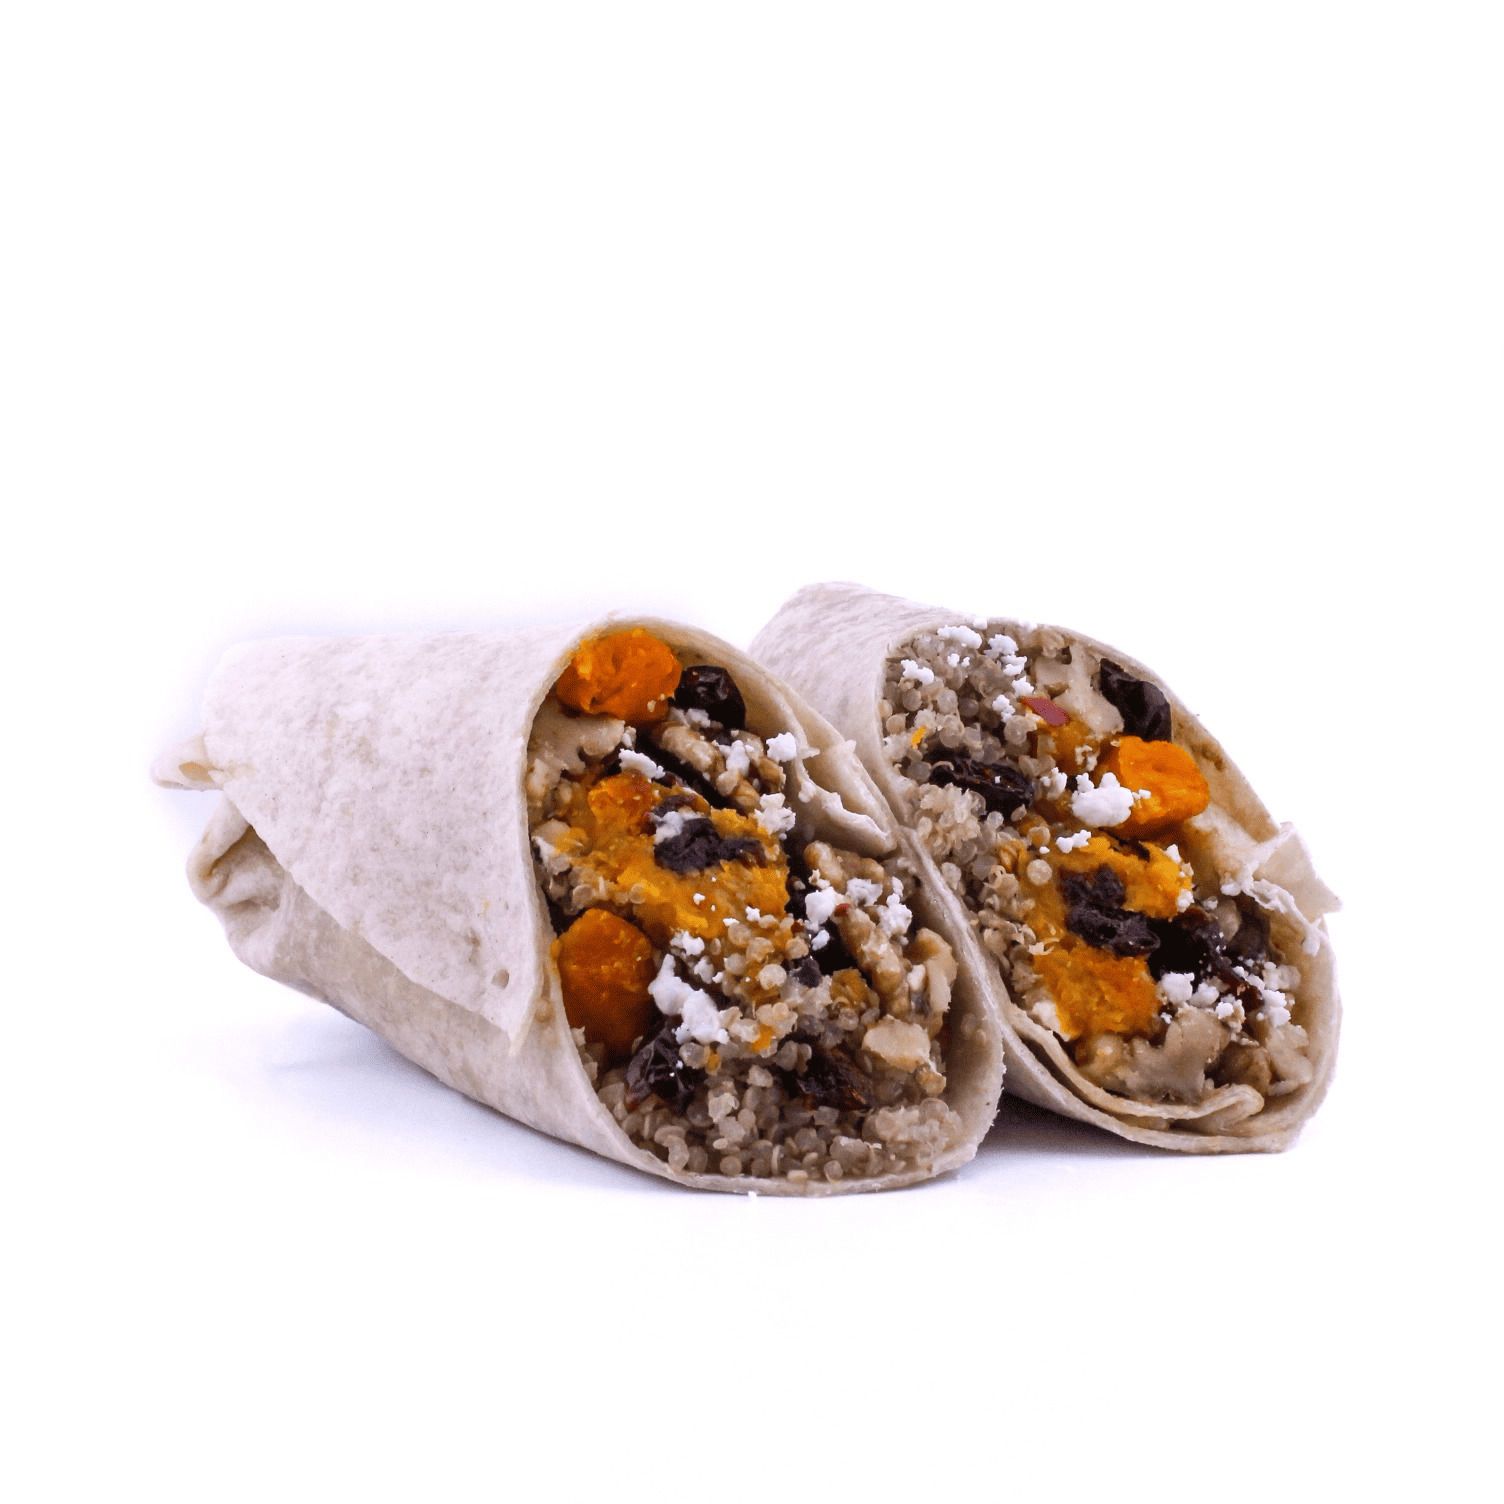 Hearty Harvest (HOT) Quinoa, roasted butternut squash, dried cranberries, goat cheese, walnuts, balsamic vinaigrette wrapped in a flour tortilla